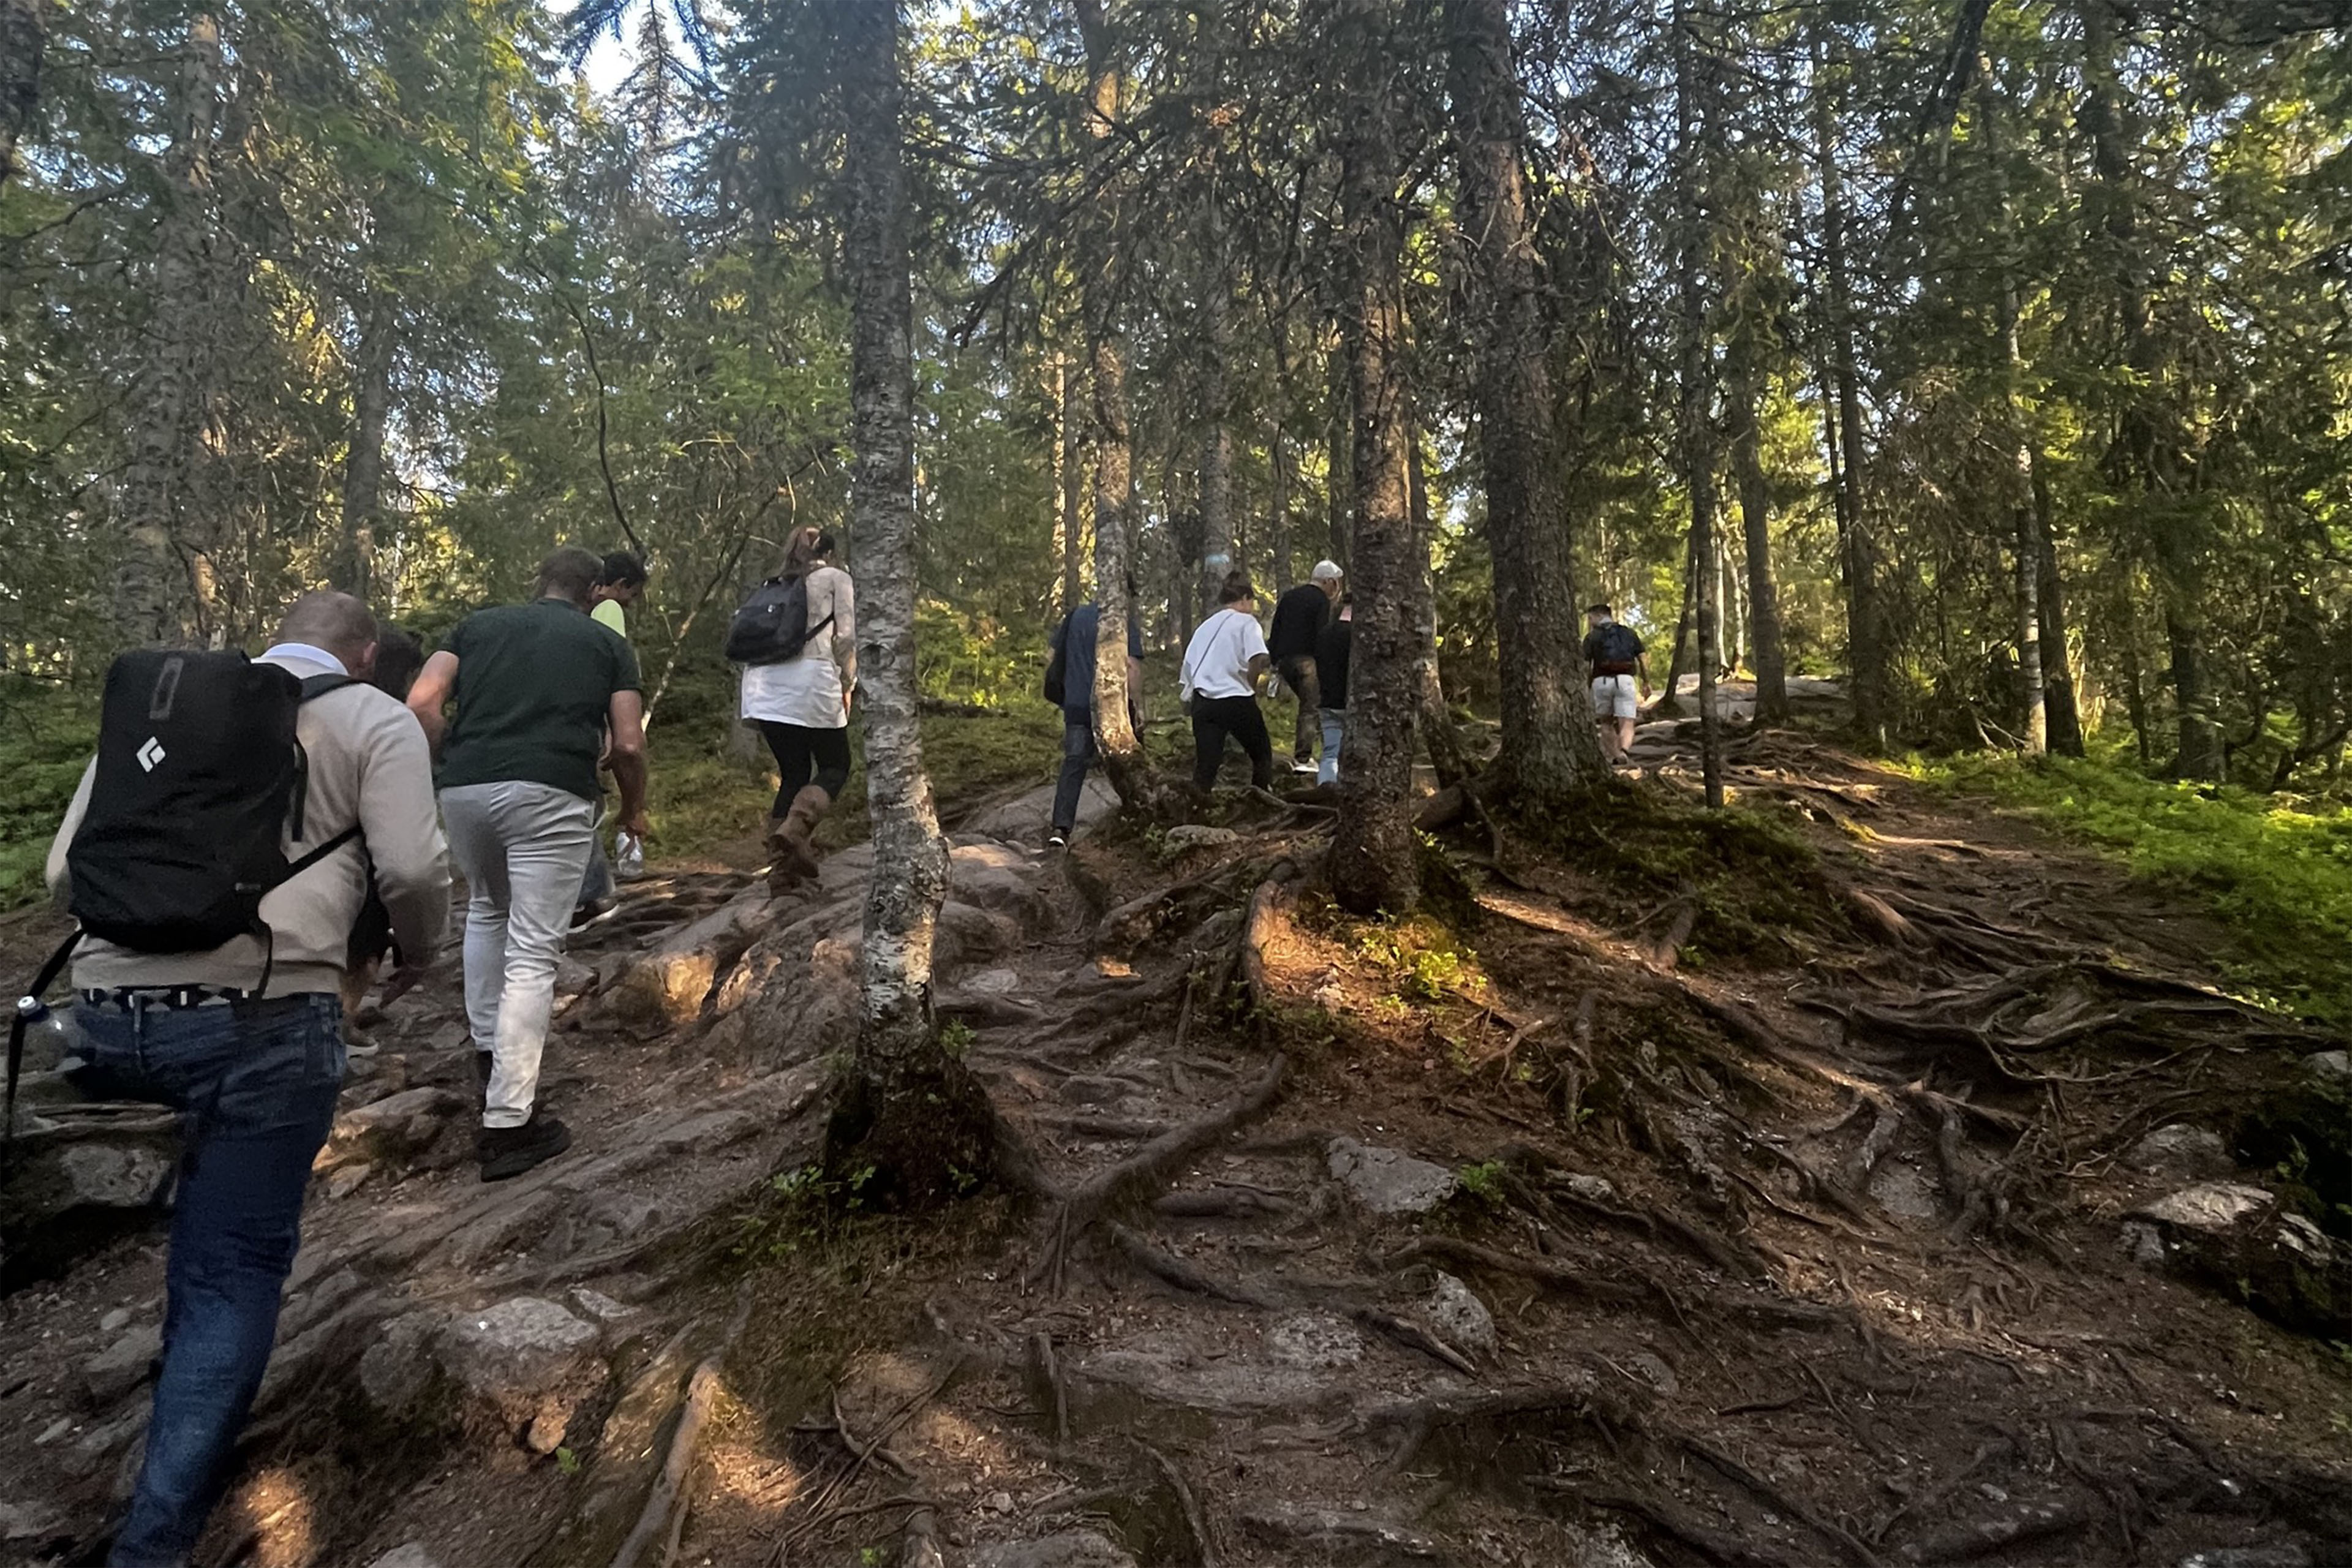 Sustainability leaders trek through the forest as part of the Forest Walkshop